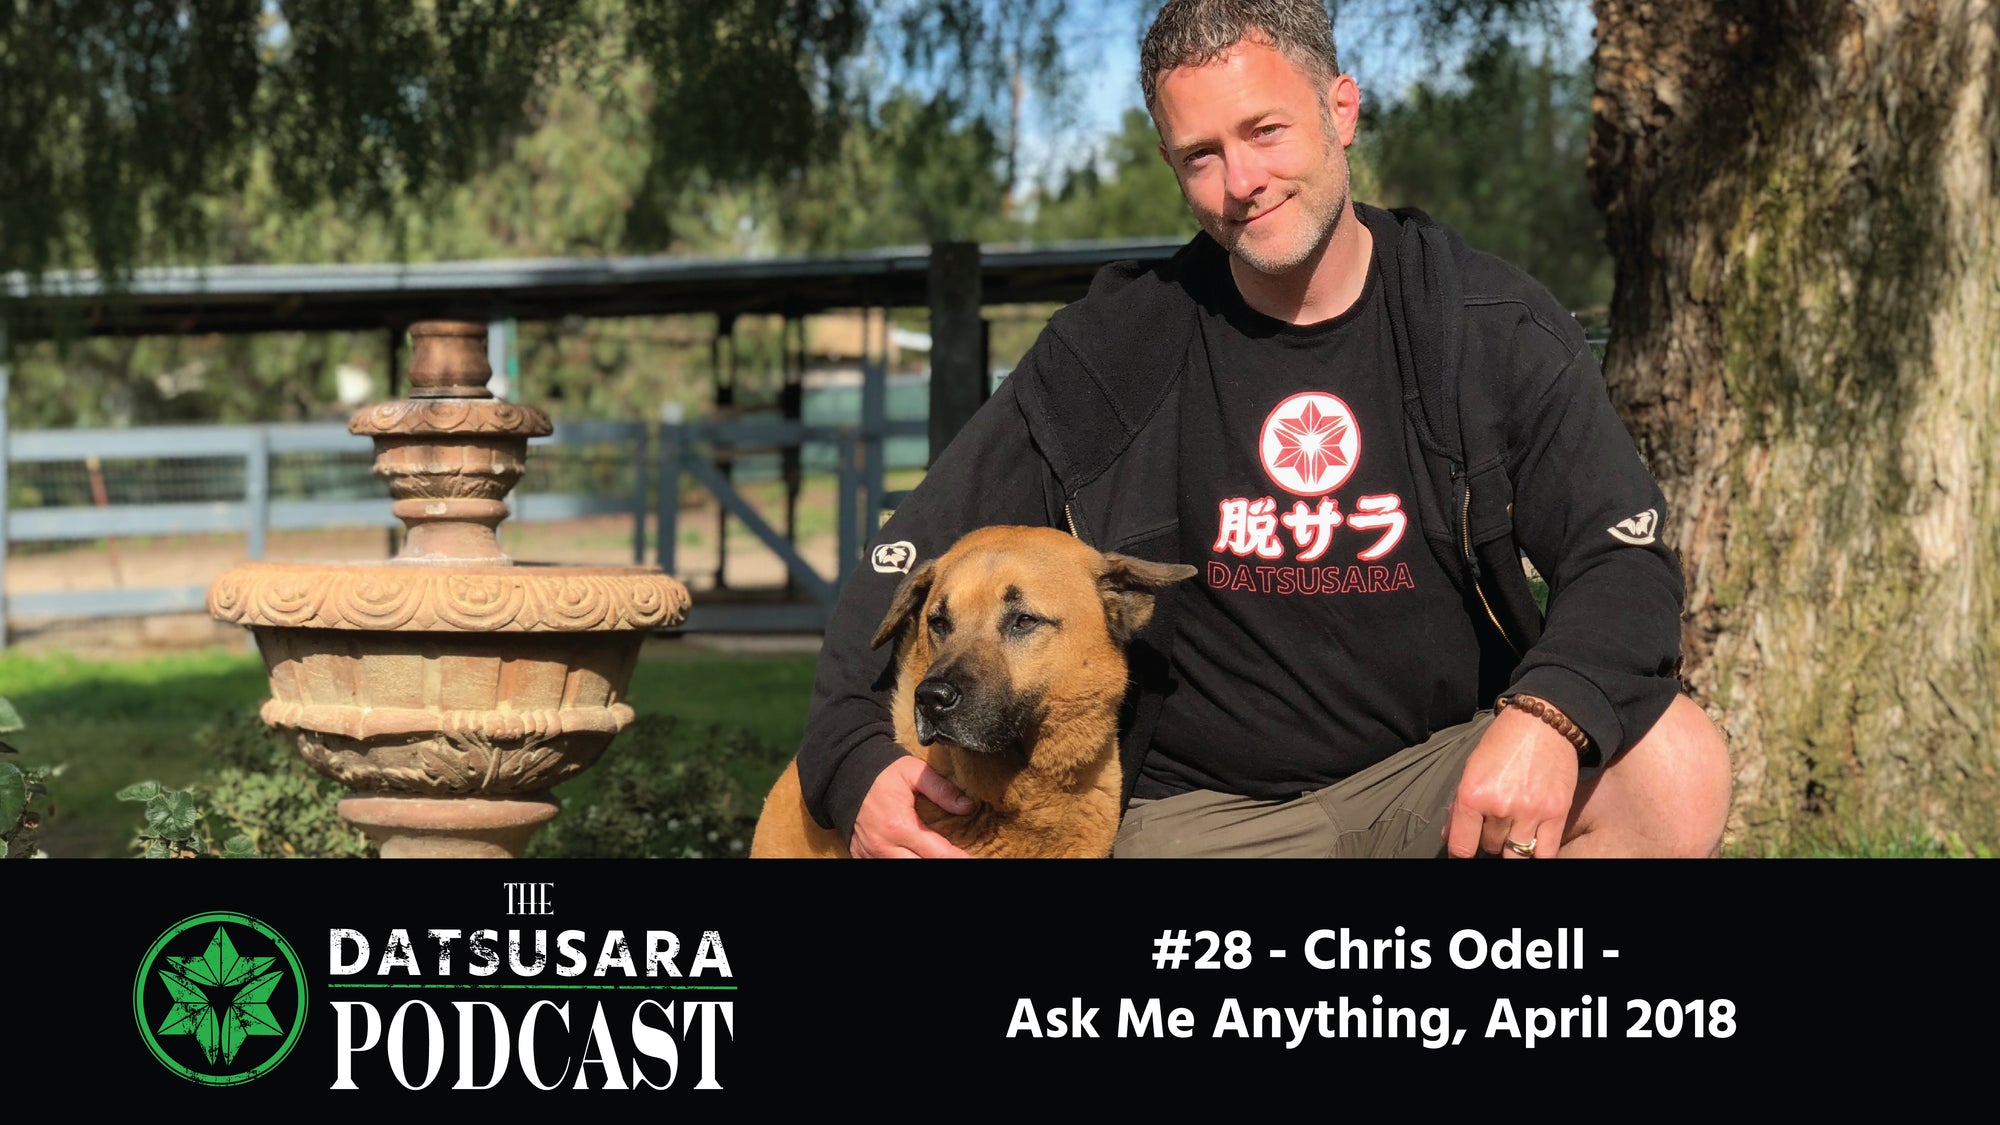 #28 - Chris Odell - Ask Me Anything, April 2018